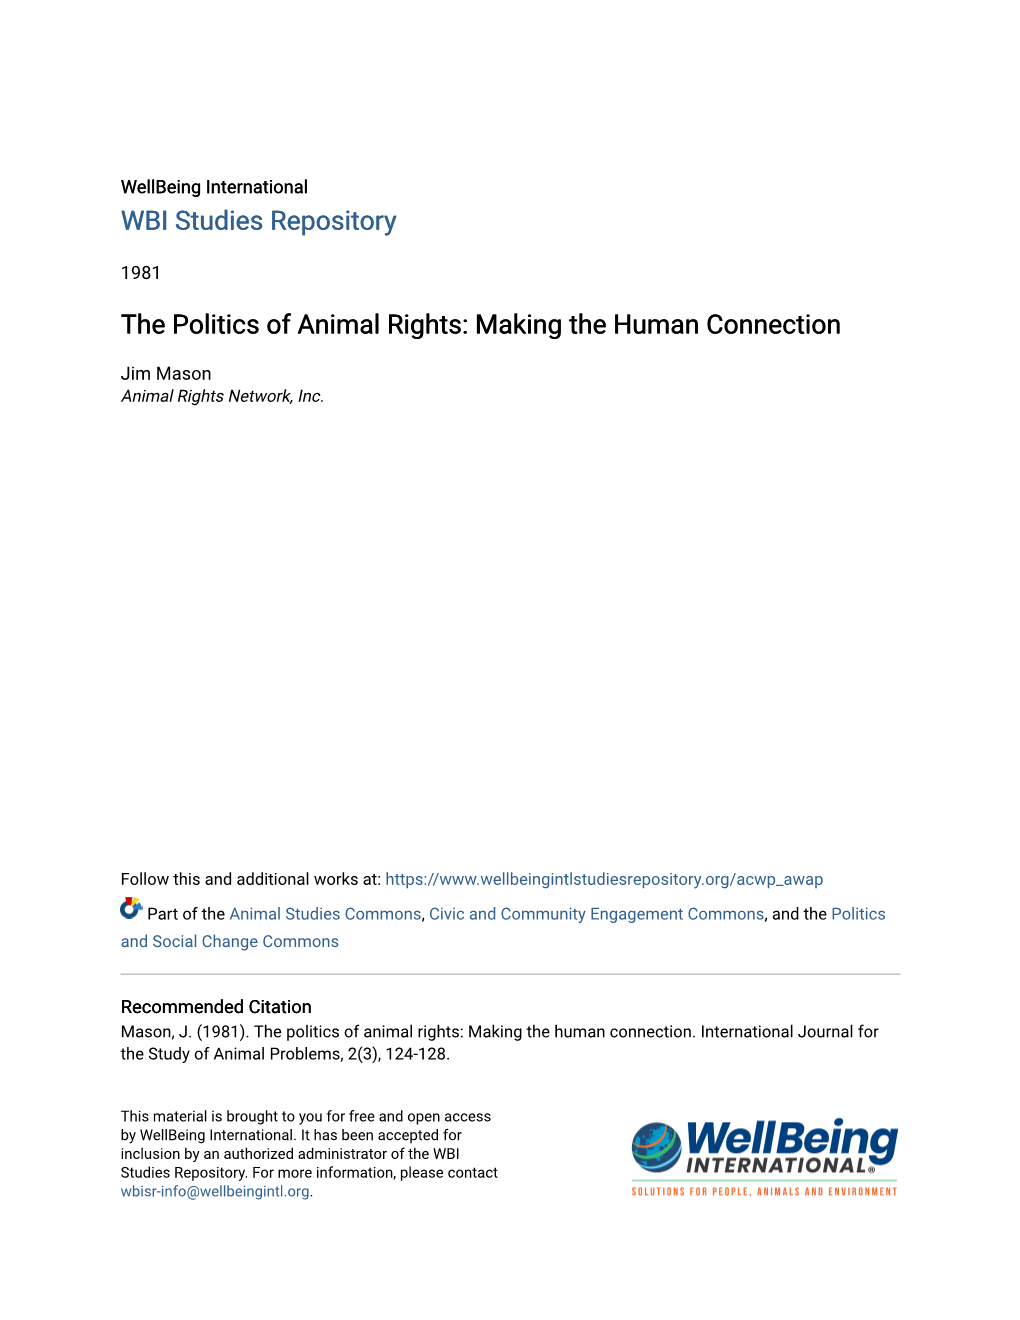 The Politics of Animal Rights: Making the Human Connection